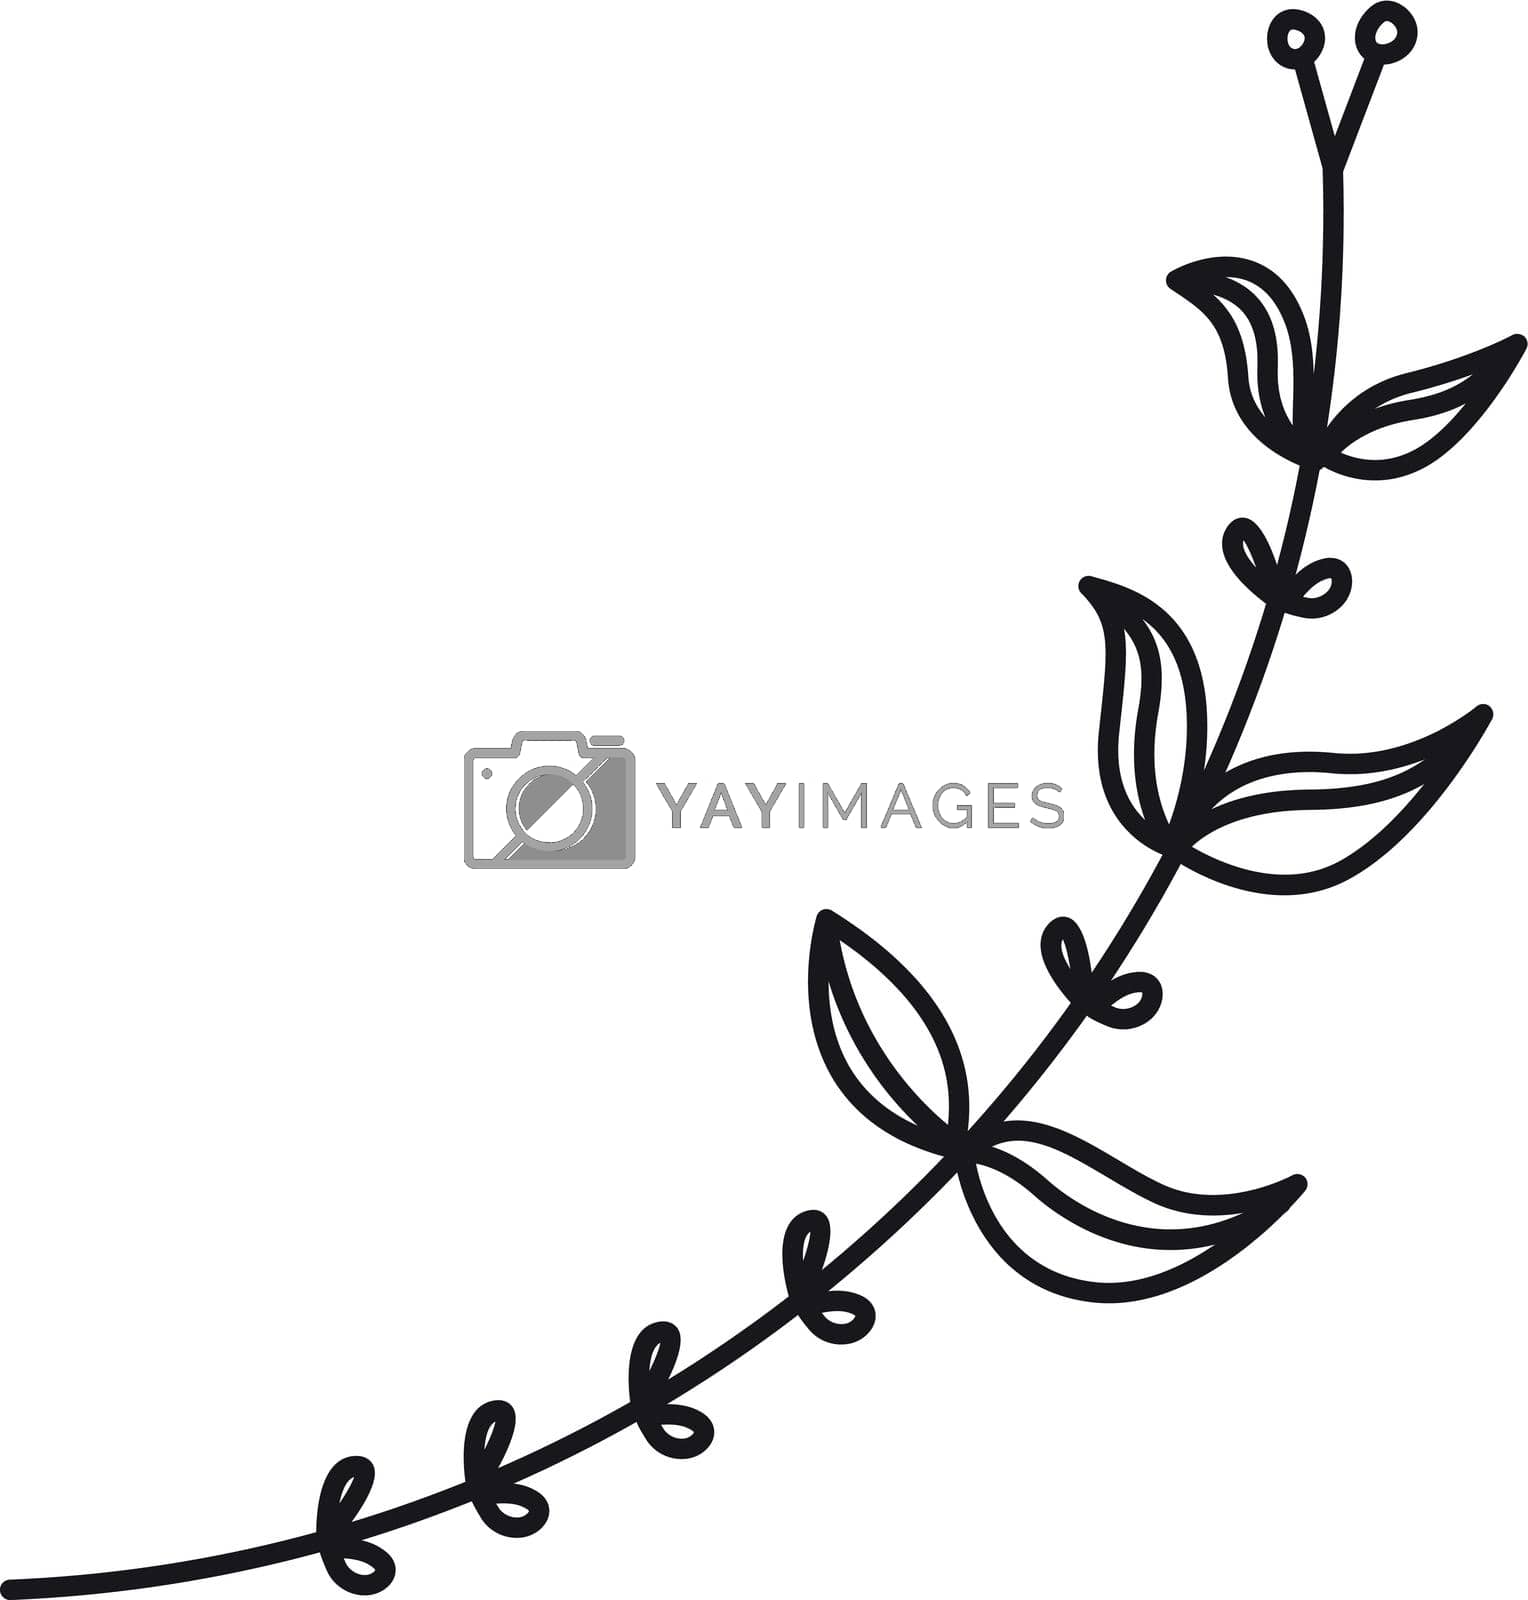 Royalty free image of Decorative floral branch. Botanical ornament freehand element by LadadikArt